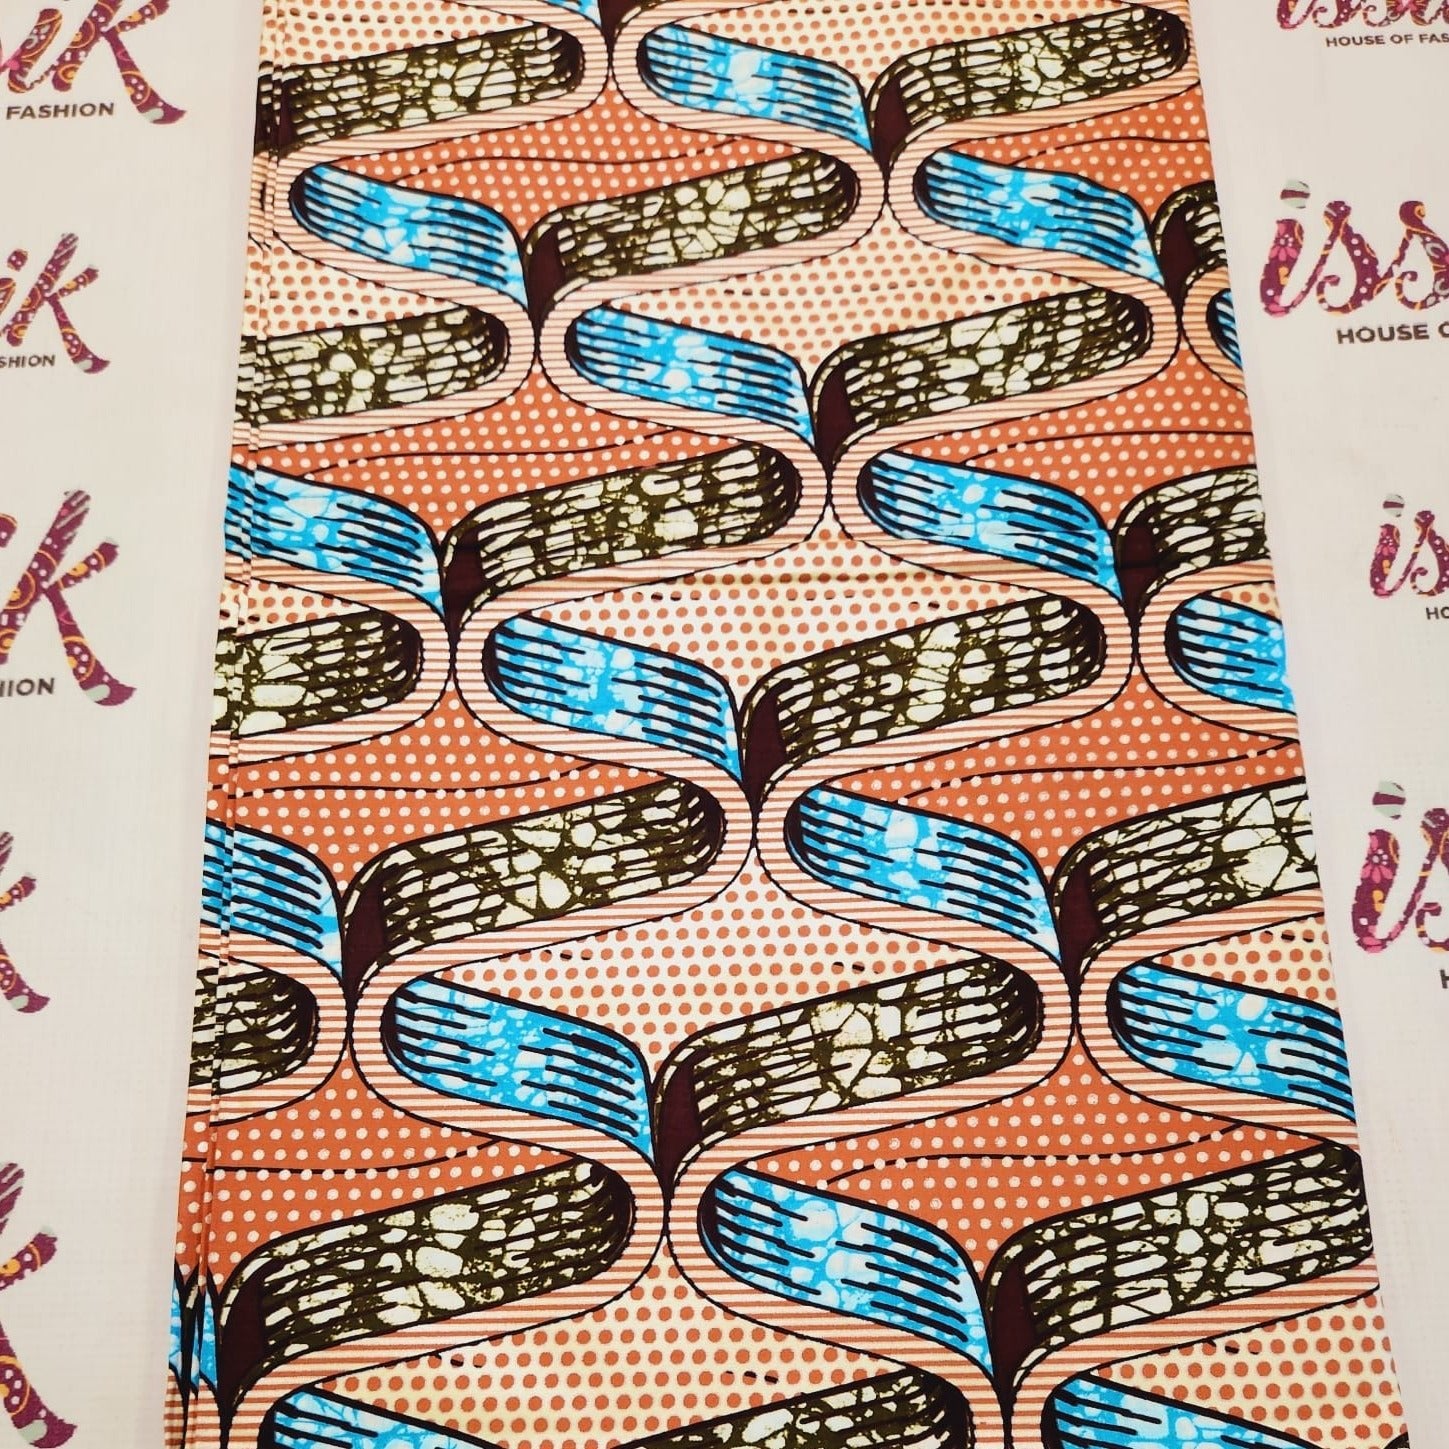 Brown & Blue Embellished Gold Ankara Fabric. - House of Prints